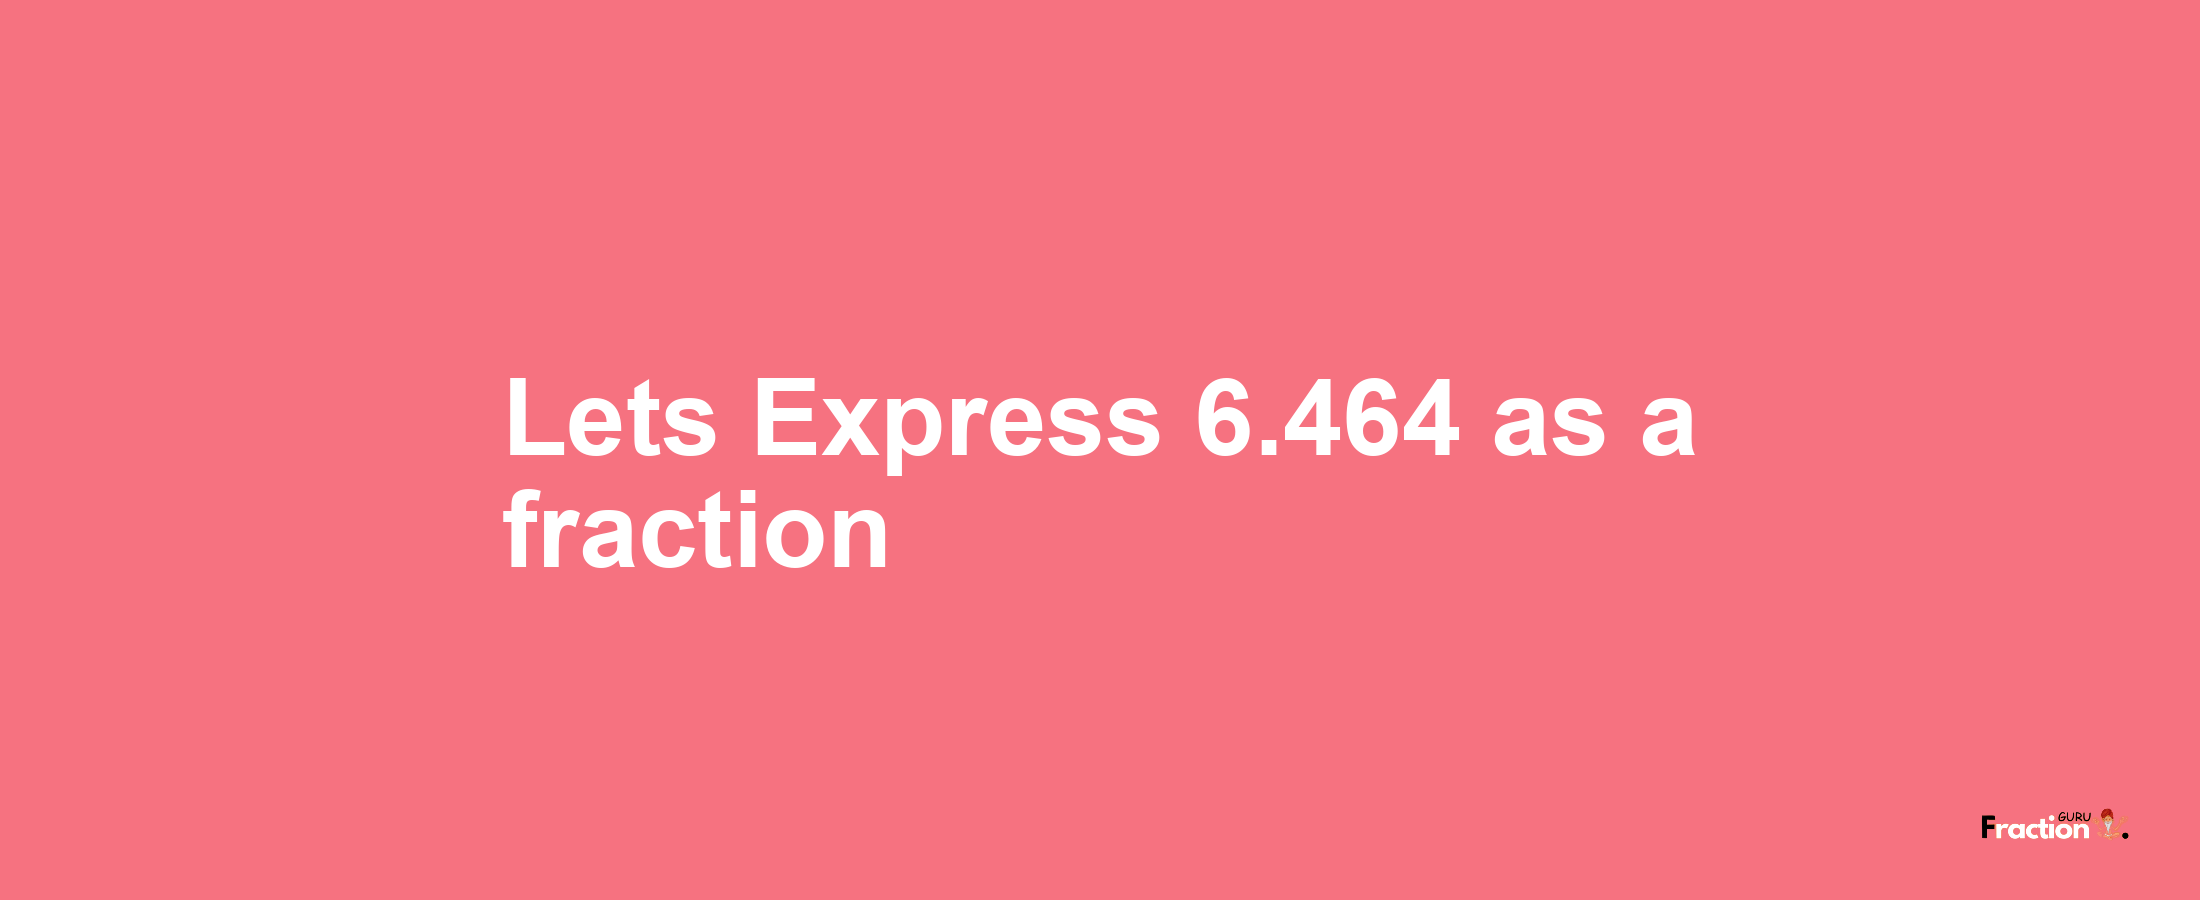 Lets Express 6.464 as afraction